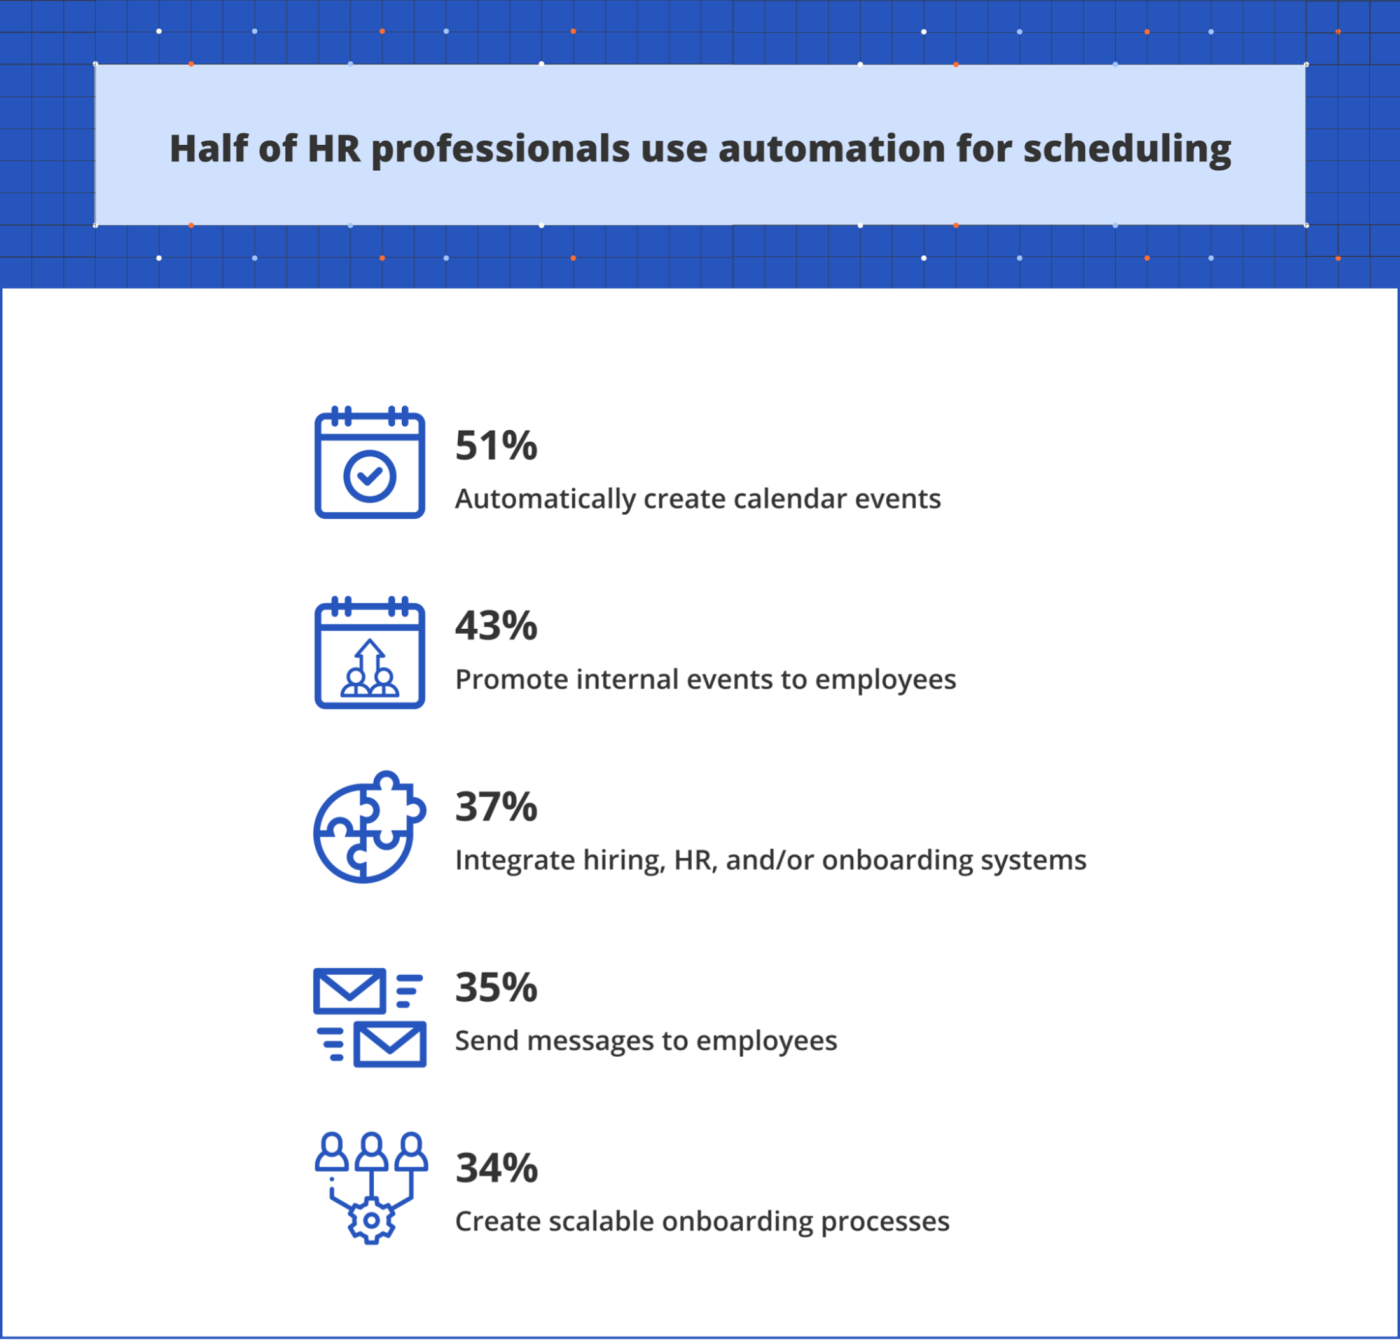 Infographic showing HR professionals' use of automation